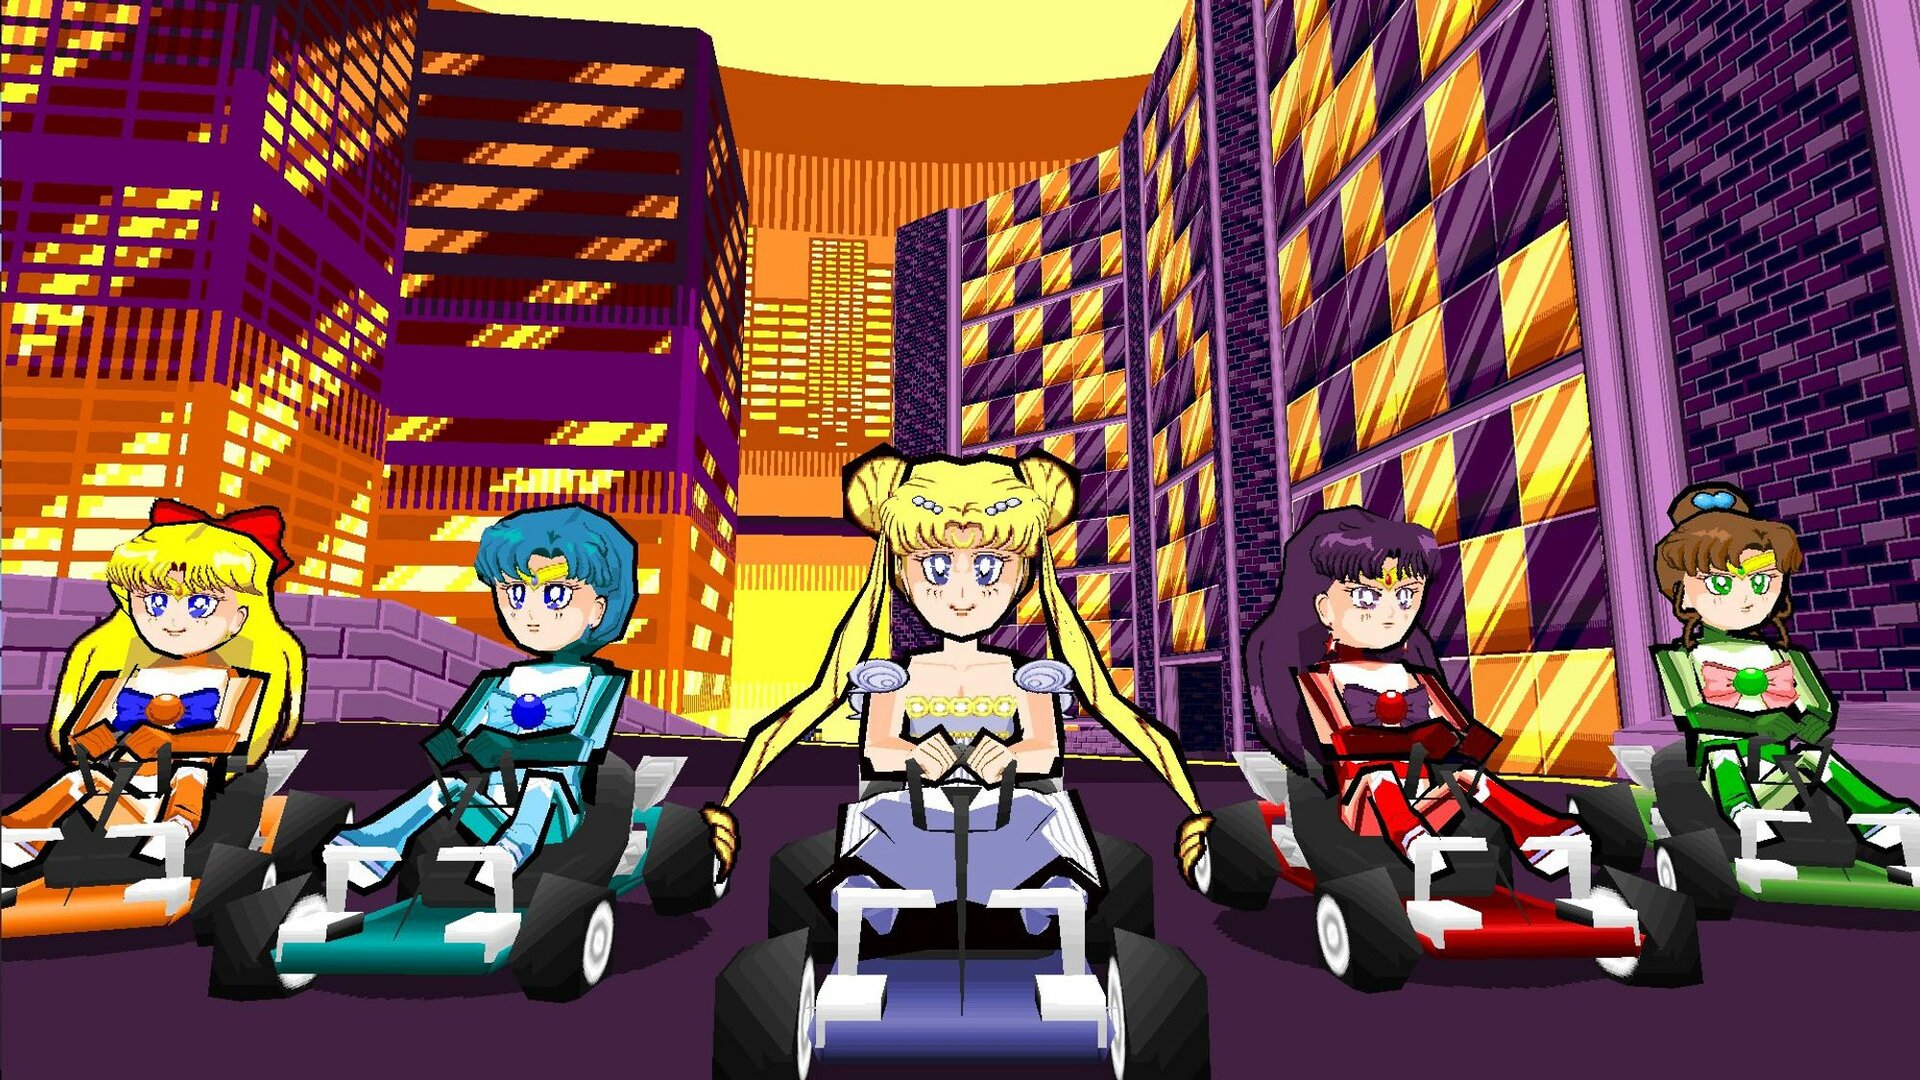 3D models for Sailor Moon (Princess Serenity), Sailor Mercury, Sailor Mars, Sailor Jupiter and Sailor Venus Racers posing for a picture on the Penthouse Plaza Zone course for SRB2Kart.